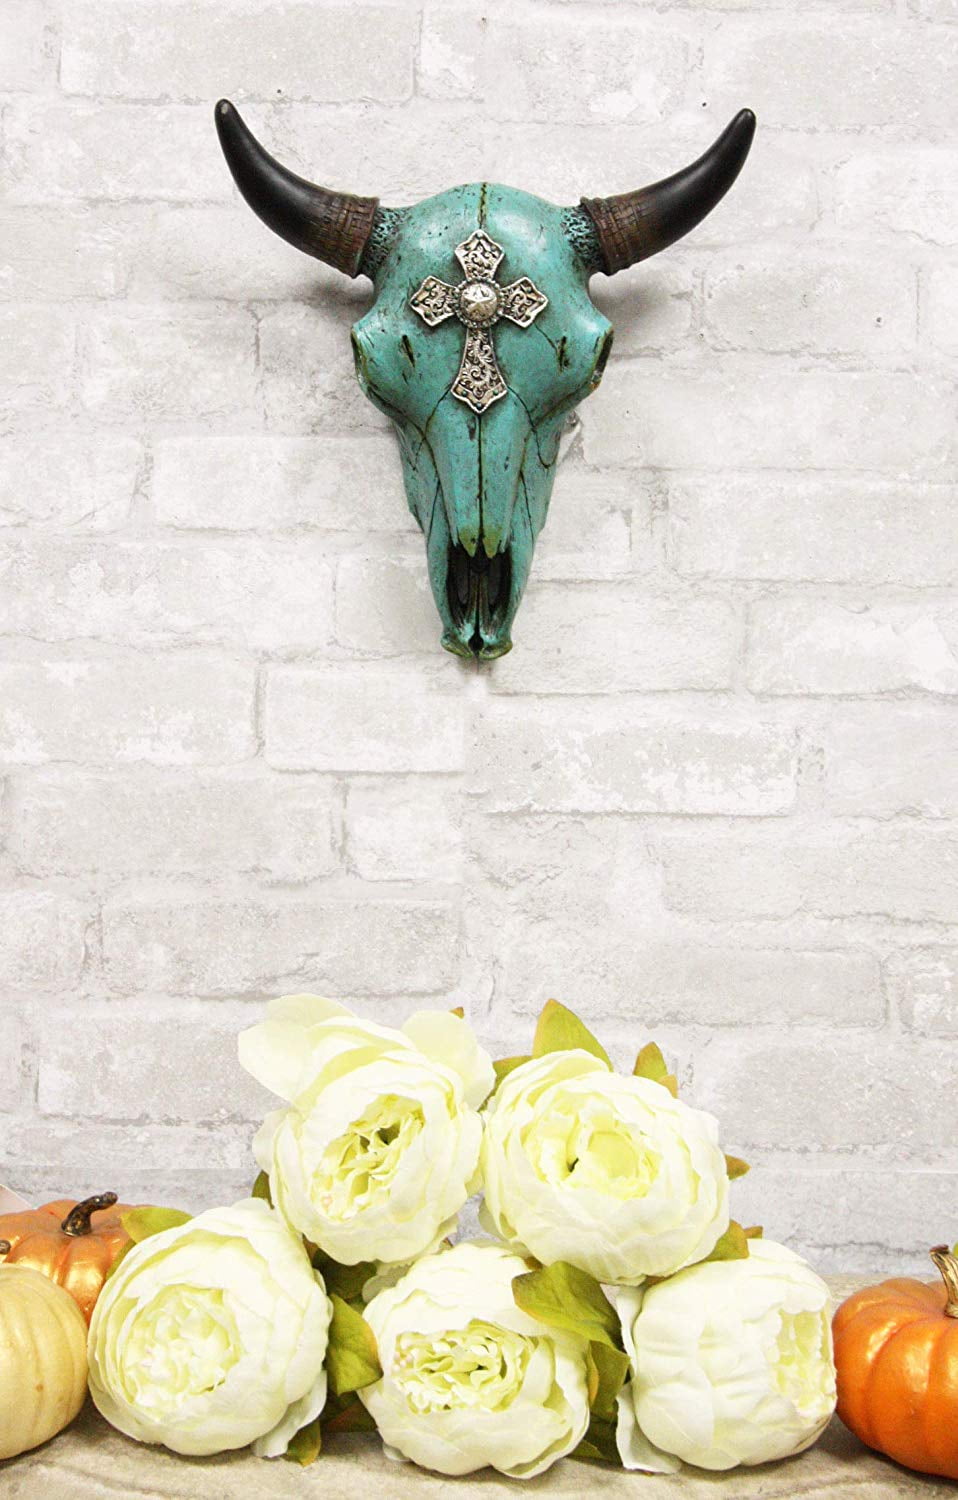 Turquoise Steer Skull with Cross Decorative Wall Sculpture 